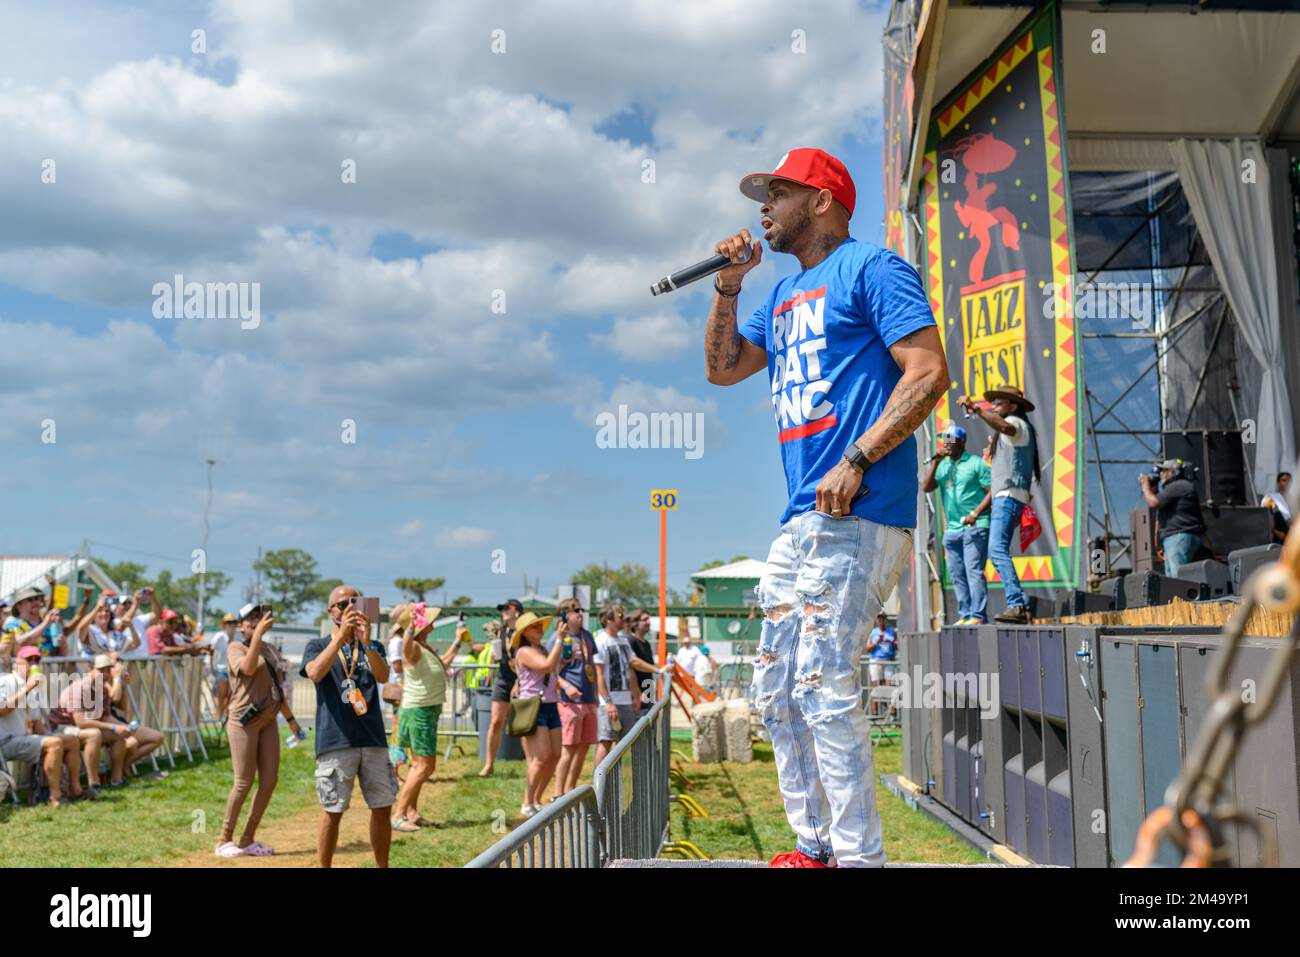 NEW ORLEANS, LA, USA - 29. APRIL 2022: Mr. Meana of Partners-N-Crime at the Congo Square Stage at the New Orleans Jazz and Heritage Festival Stockfoto